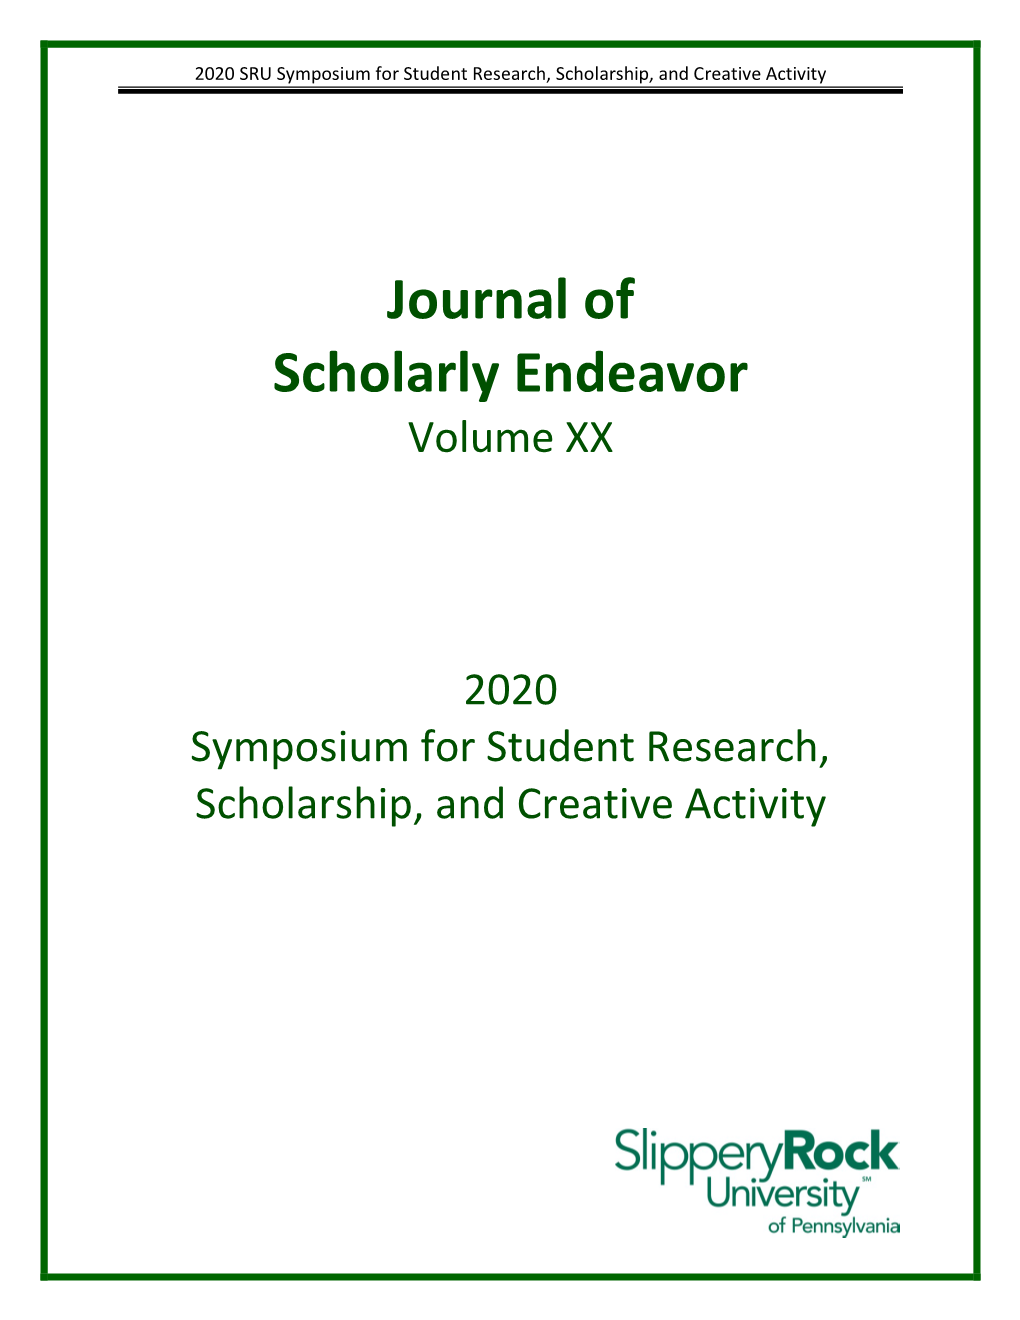 2020 SRU Symposium for Student Research, Scholarship, and Creative Activity